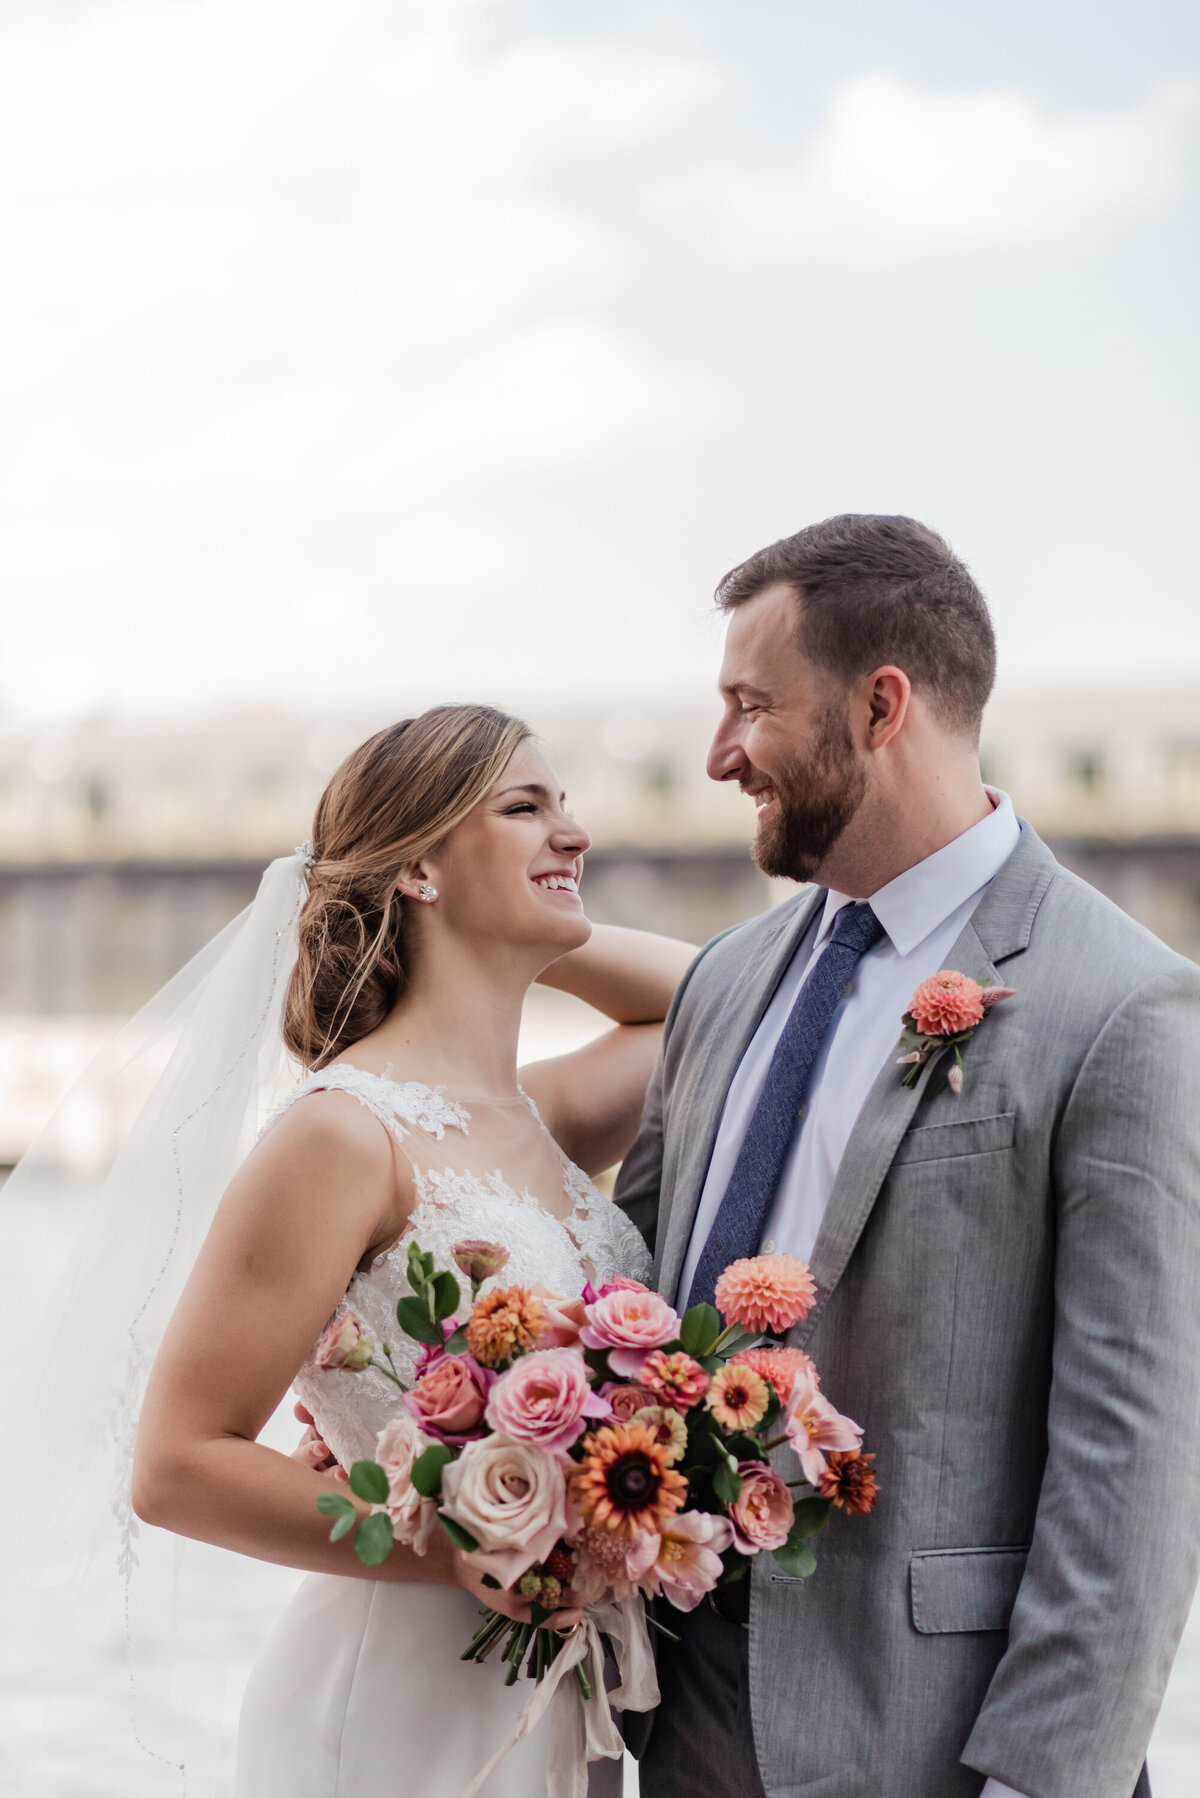 Kate Campbell Floral Winslow Baltimore Wedding Fall Marlayna16